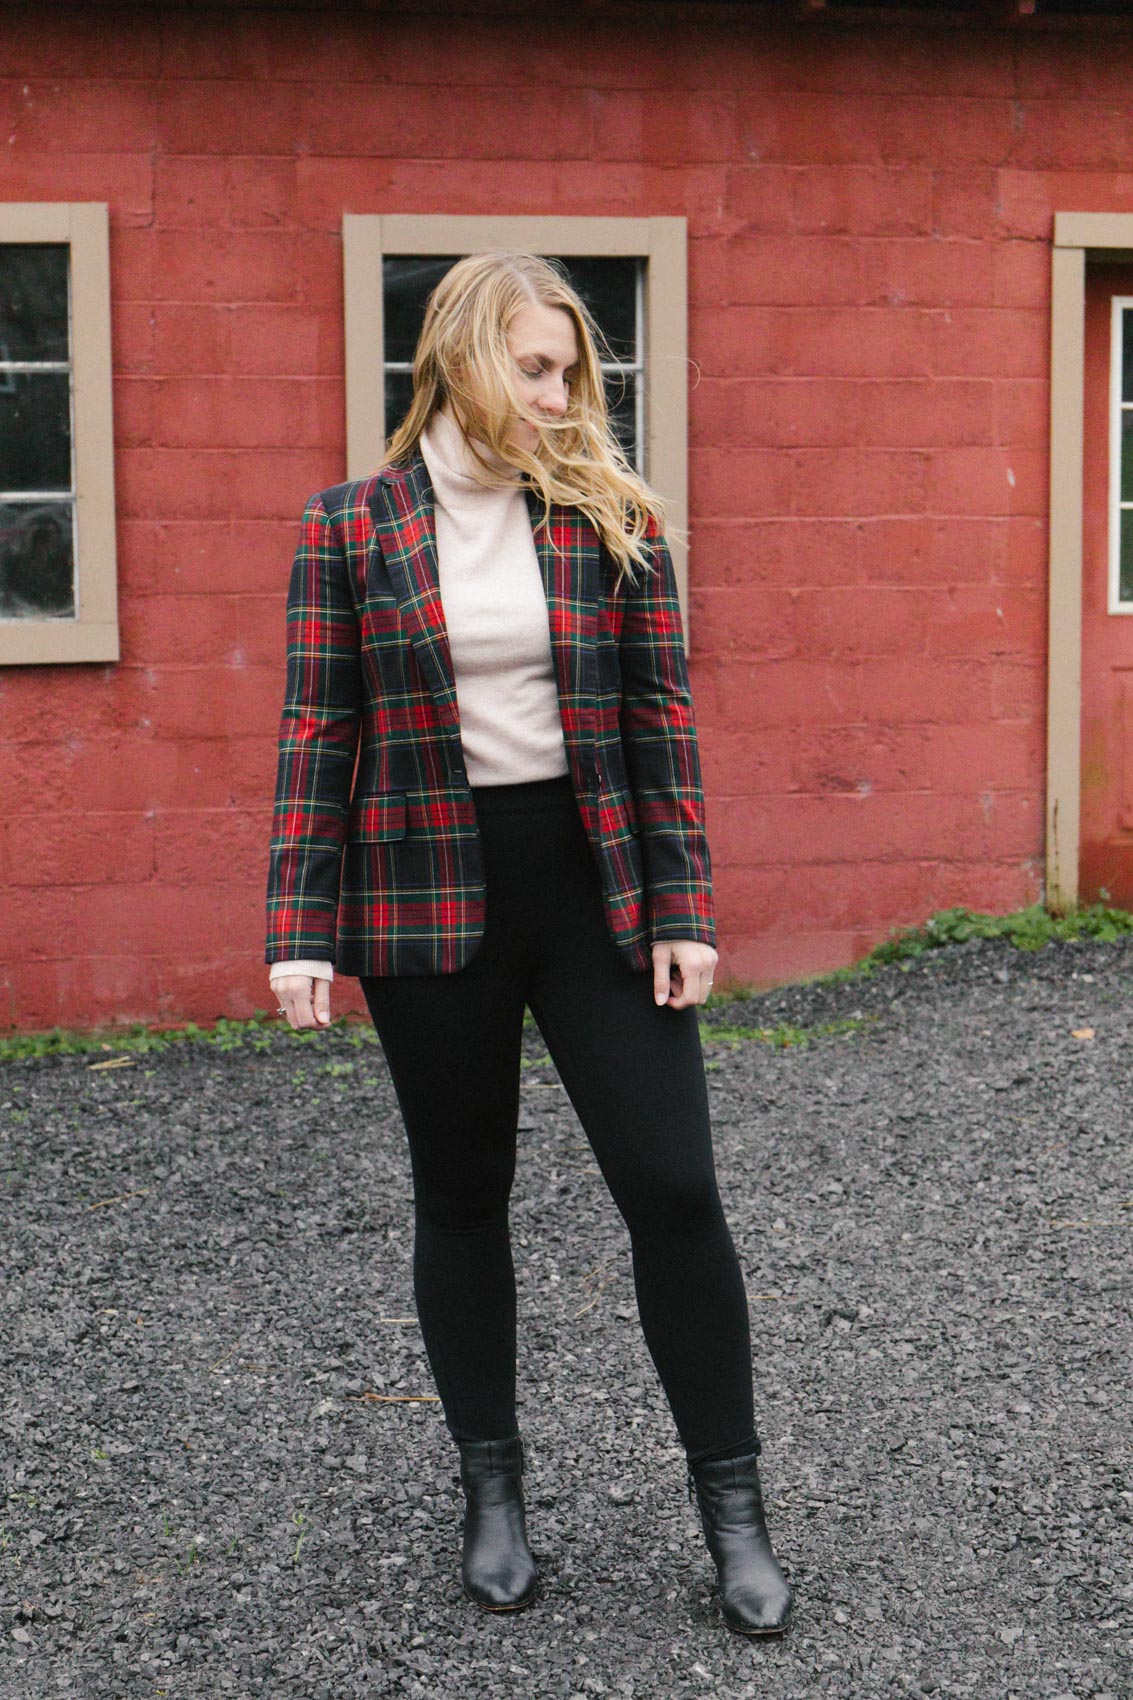 Trendy blazer outfit with a plaid suit jacket over a turtleneck sweater paired with Spanx black pants and ankle boots